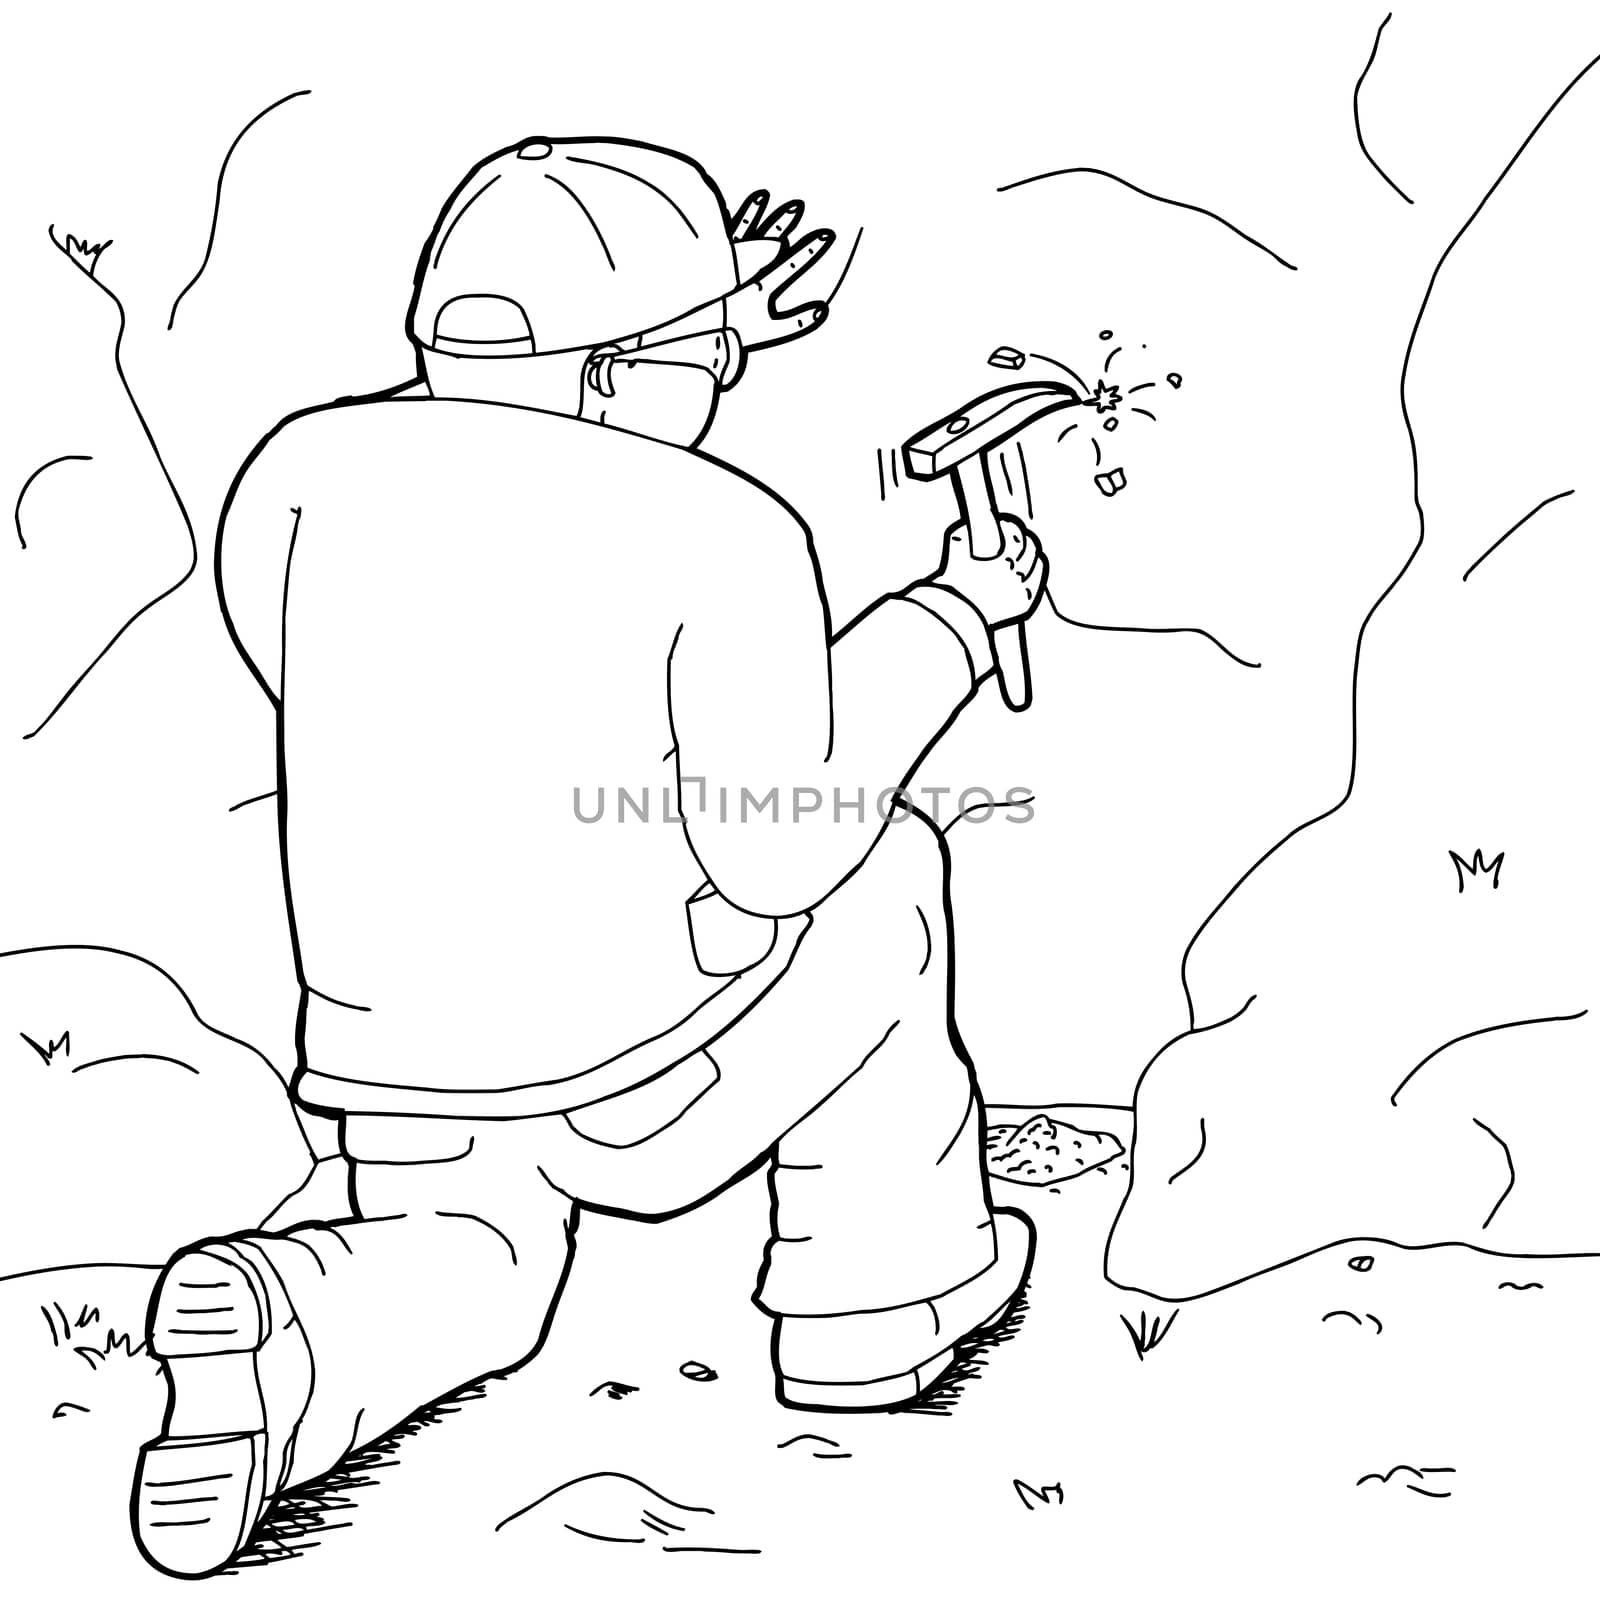 Outline cartoon of geologist with rock hammer collecting specimens